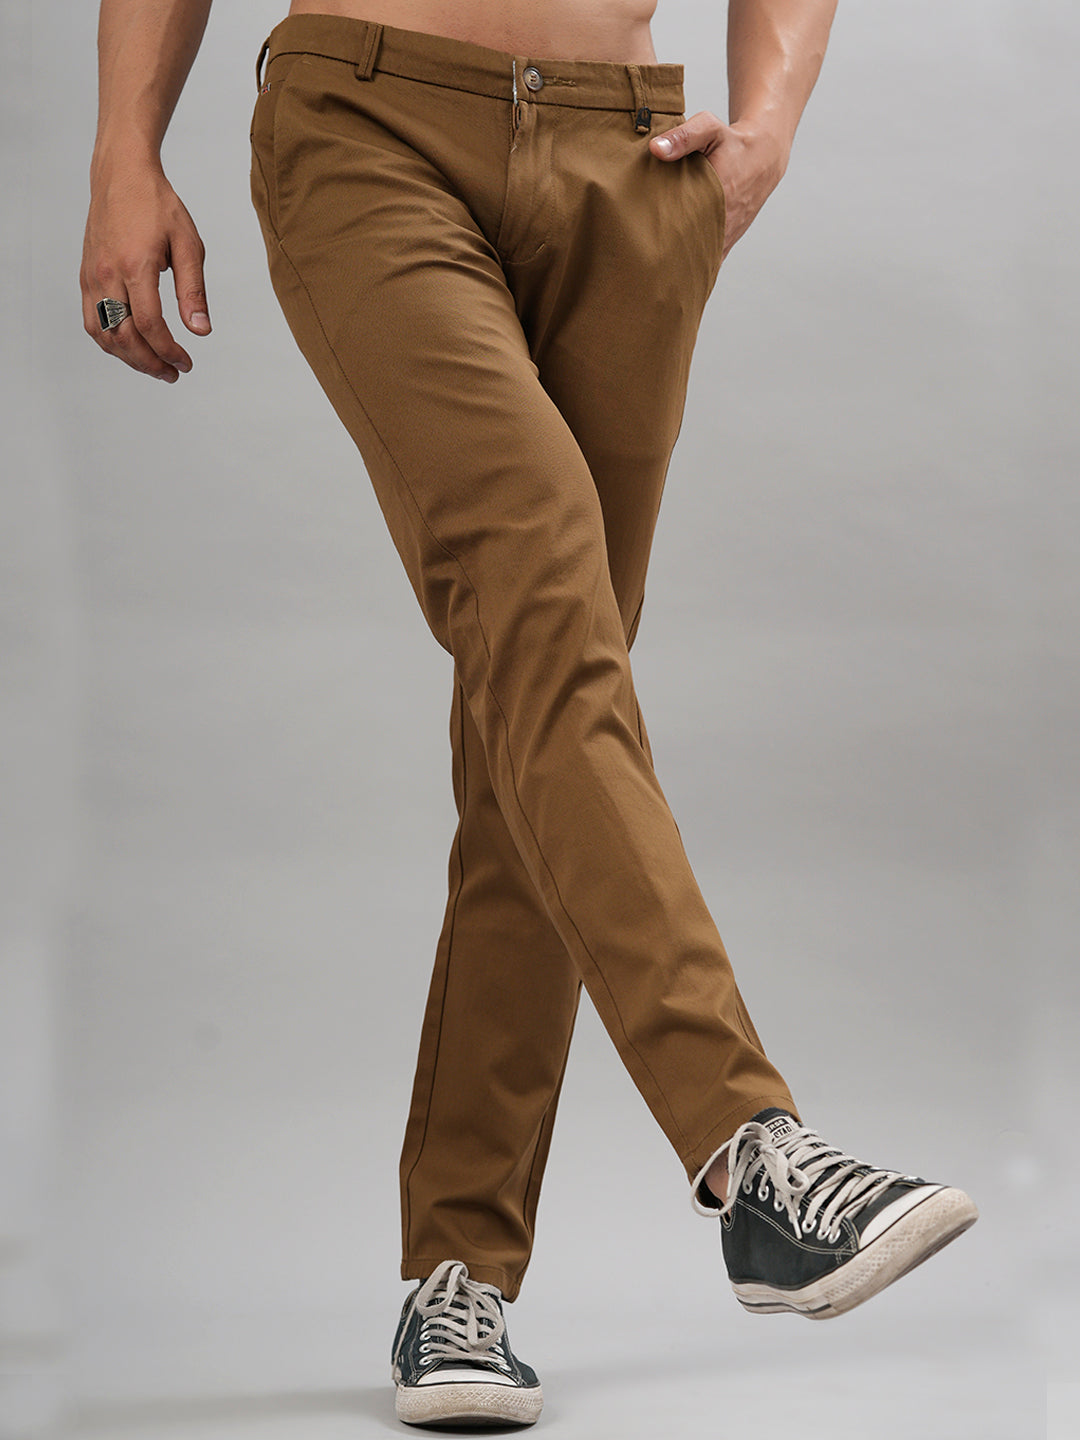 Buy Old Camel Slim Fit Chino Trouser Online for Men | Minus One